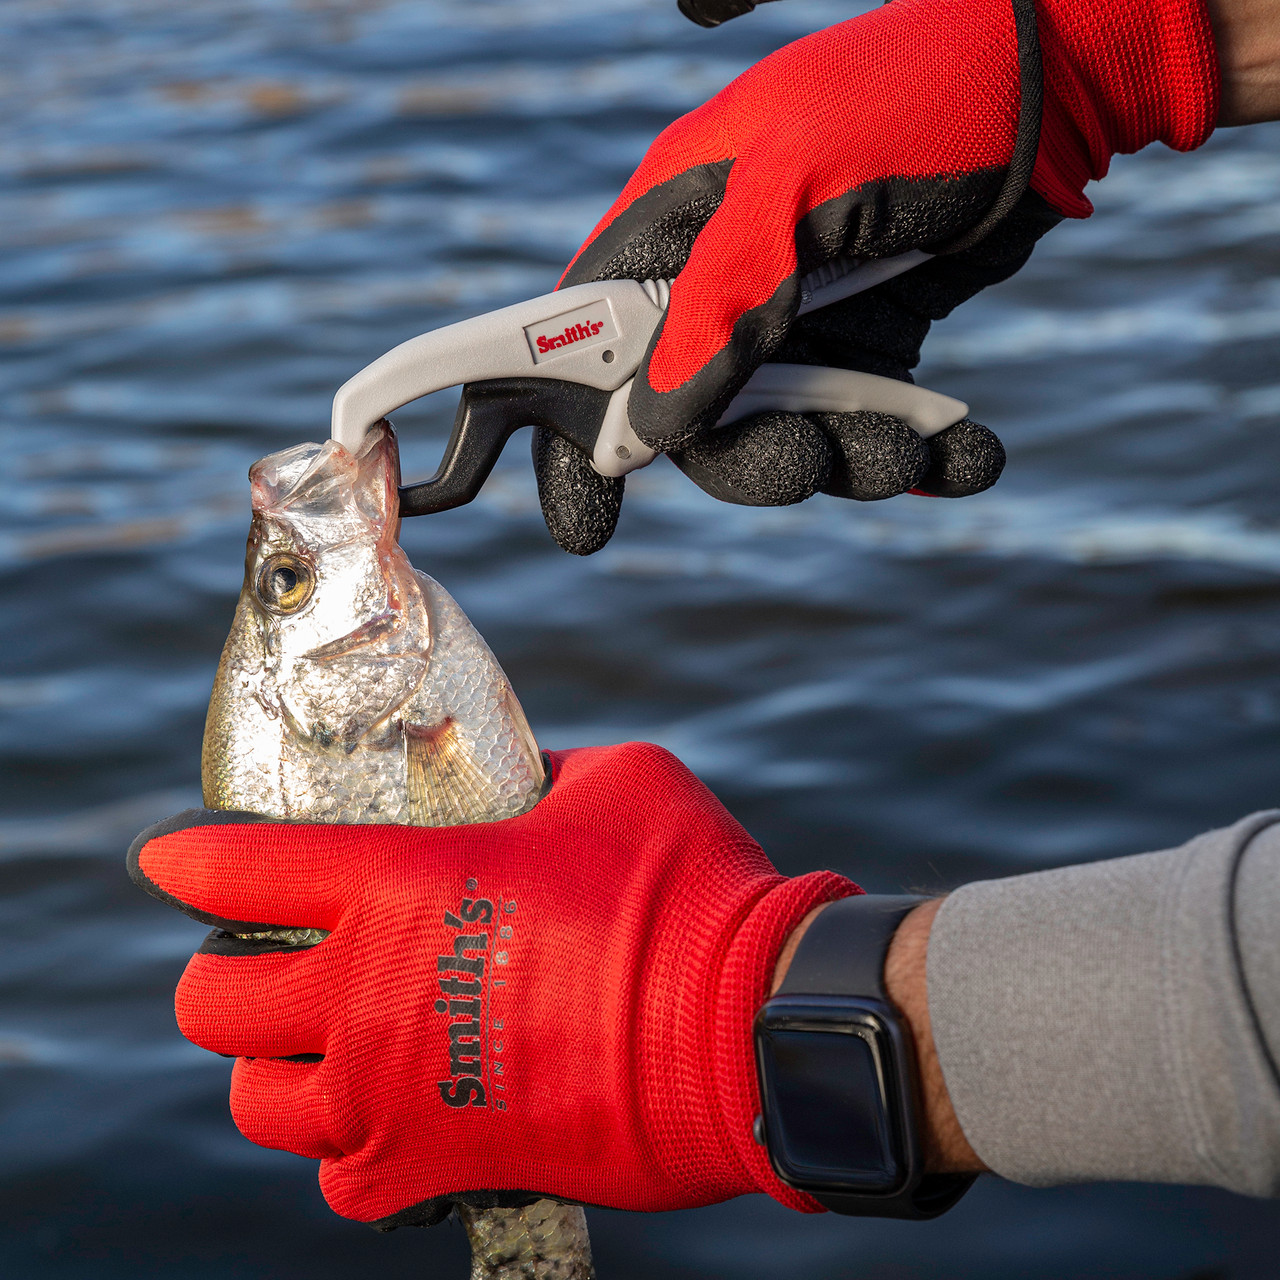 Textured Grip Fishing Gloves XL - Smith's Consumer Products